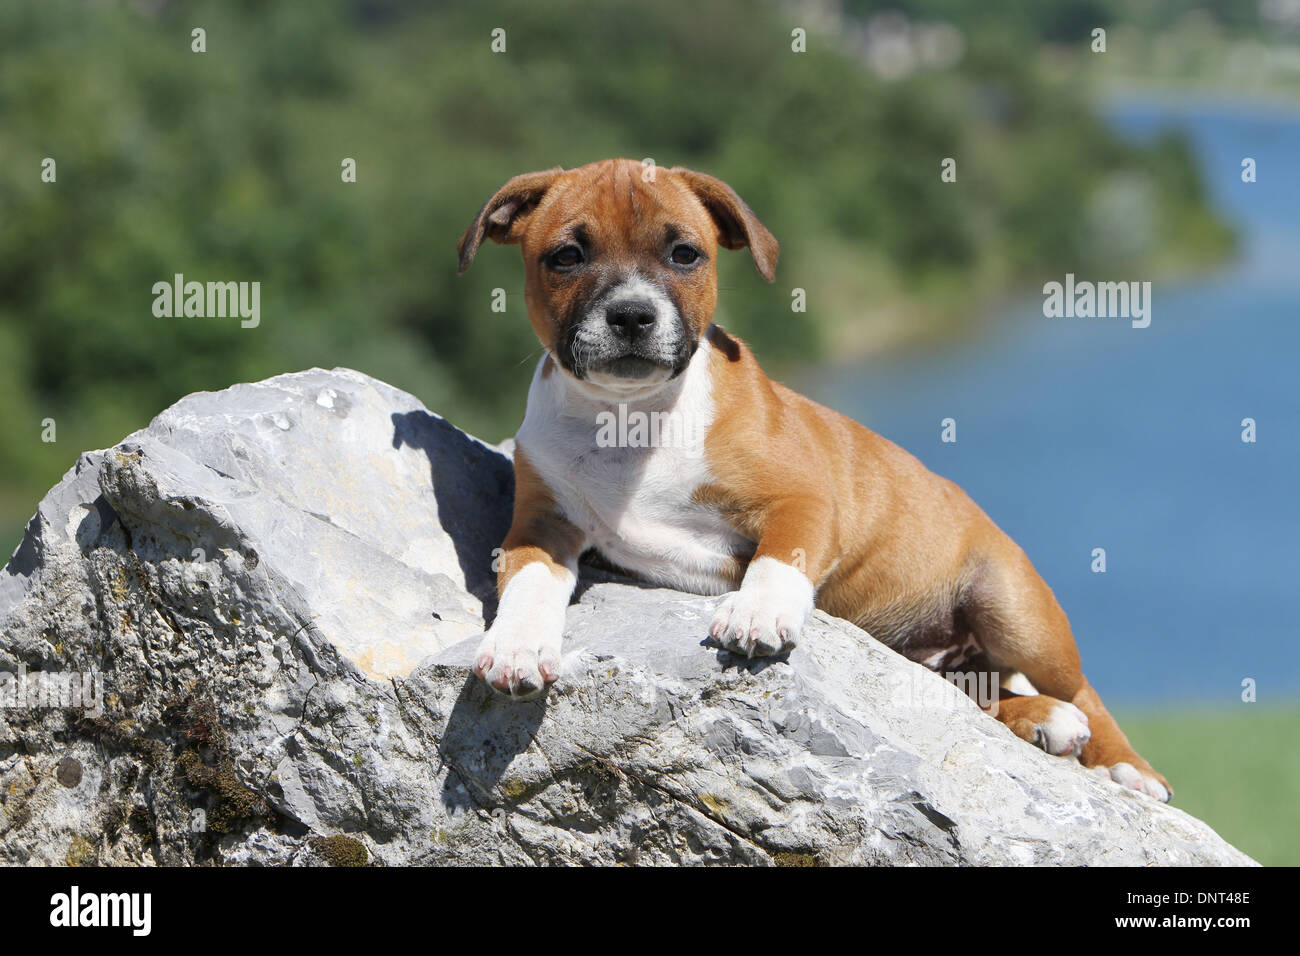 dog Staffordshire Bull Terrier / Staffie  puppy lying on a rock Stock Photo